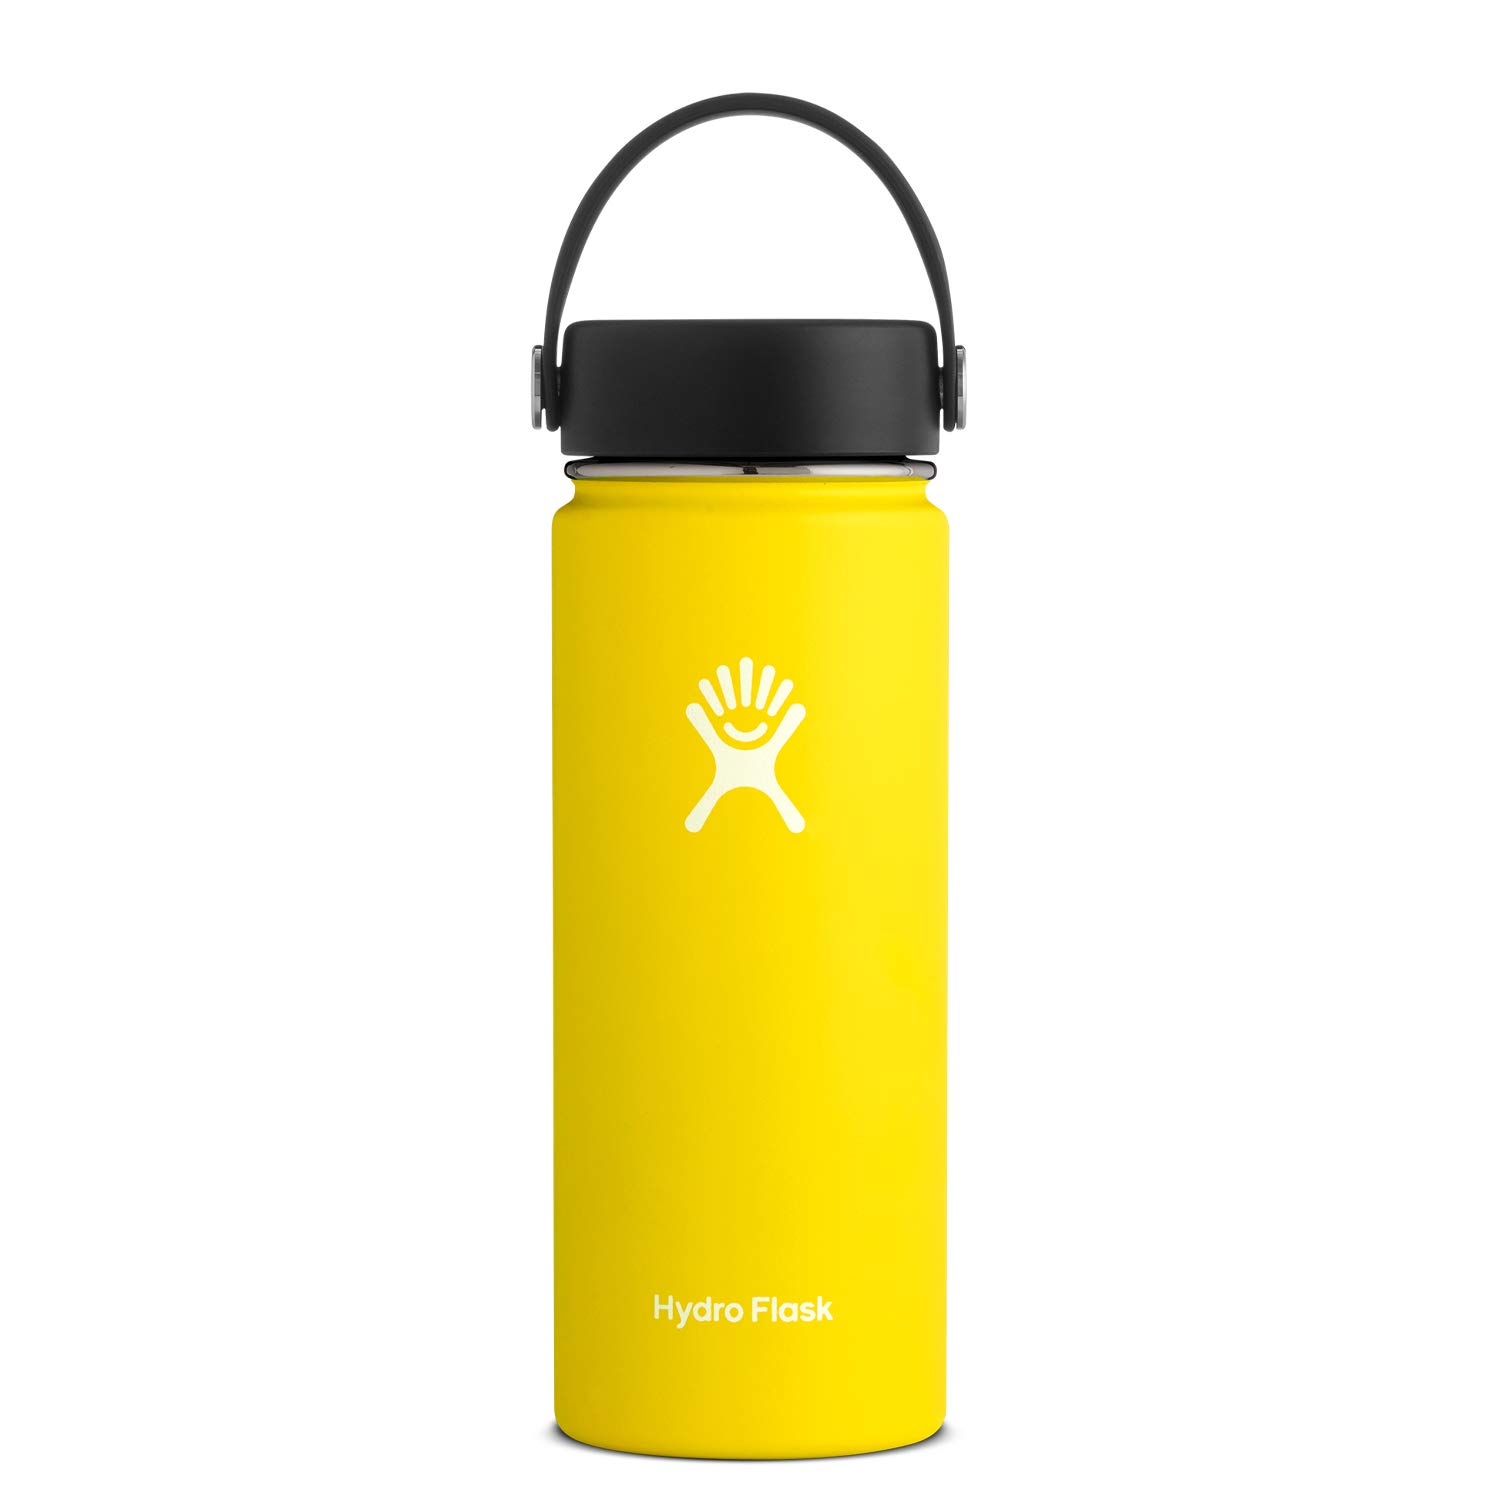 Book Cover Hydro Flask Water Bottle - Stainless Steel & Vacuum Insulated - Wide Mouth 1.0 with Leak Proof Flex Cap - 18 oz, Lemon